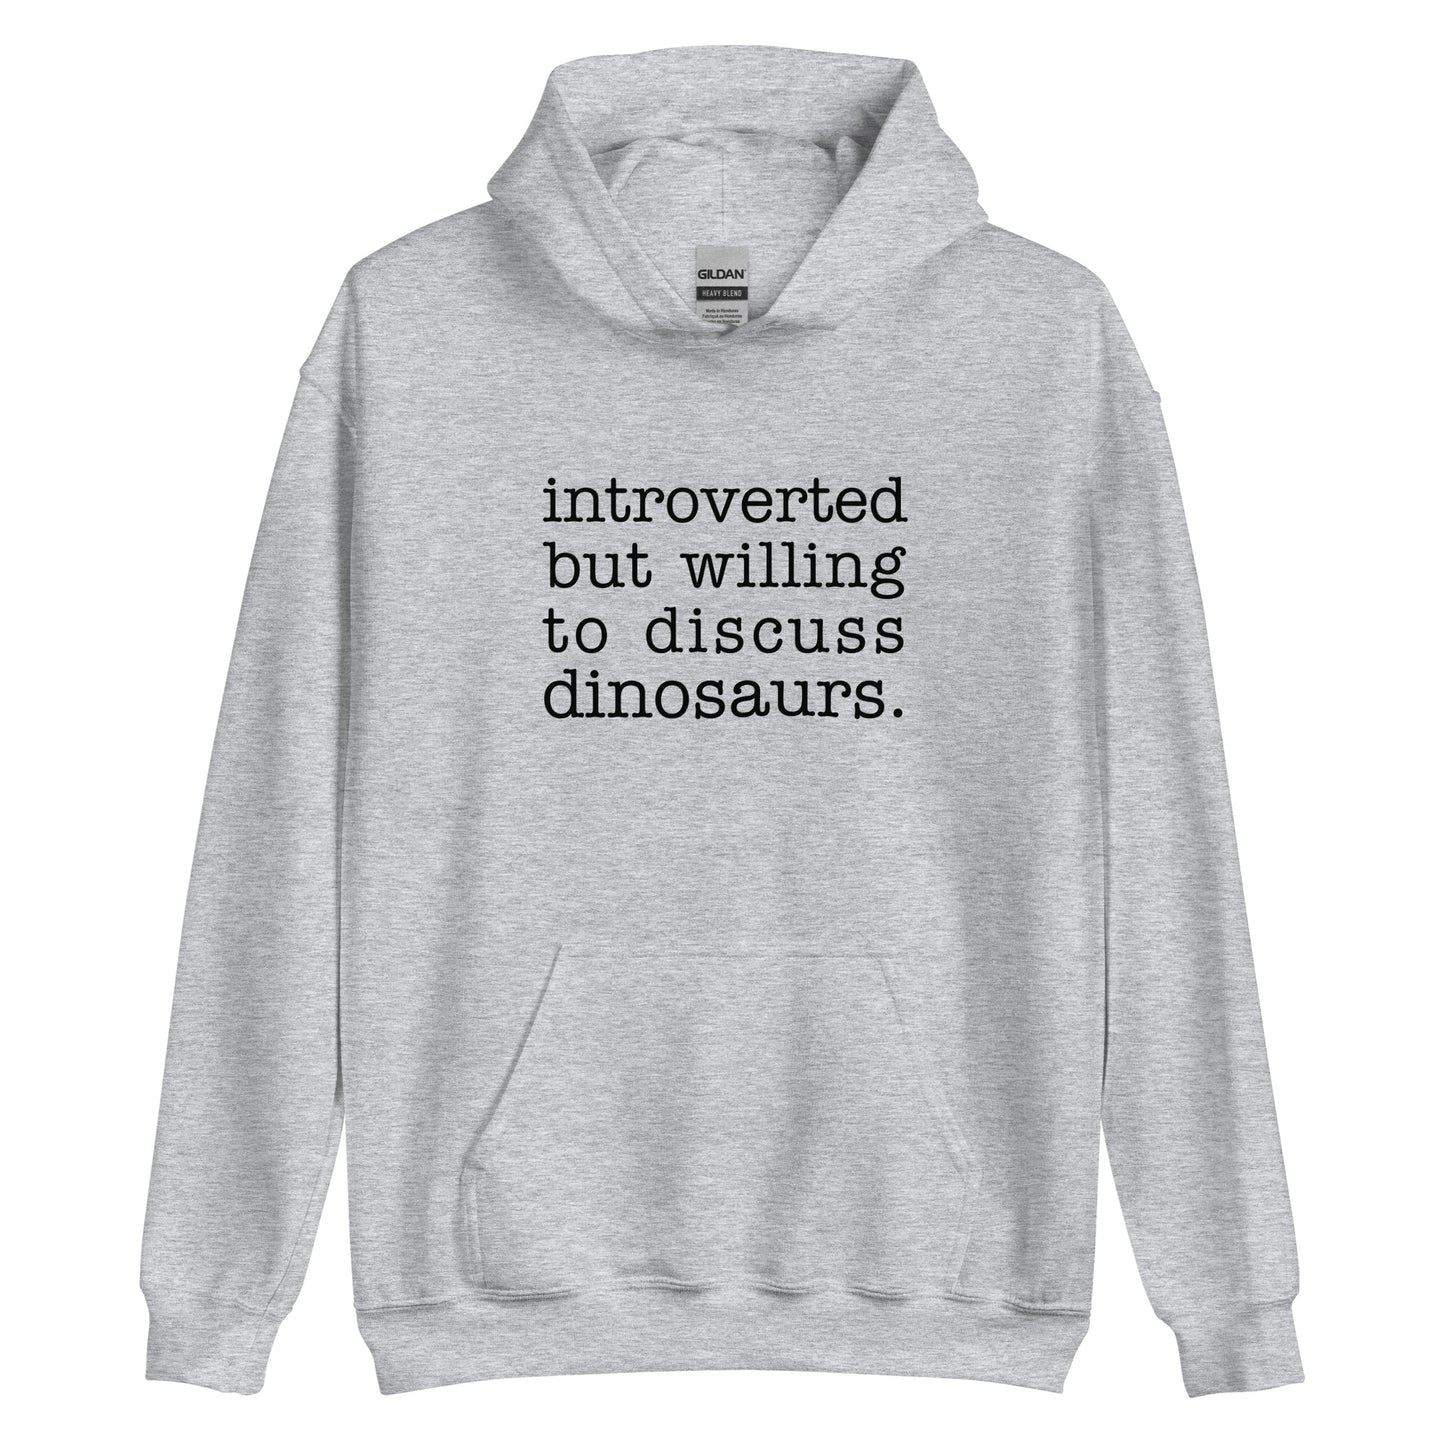 A heathered grey hooded sweatshirt with black text reading "introverted but willing to discuss dinosaurs"